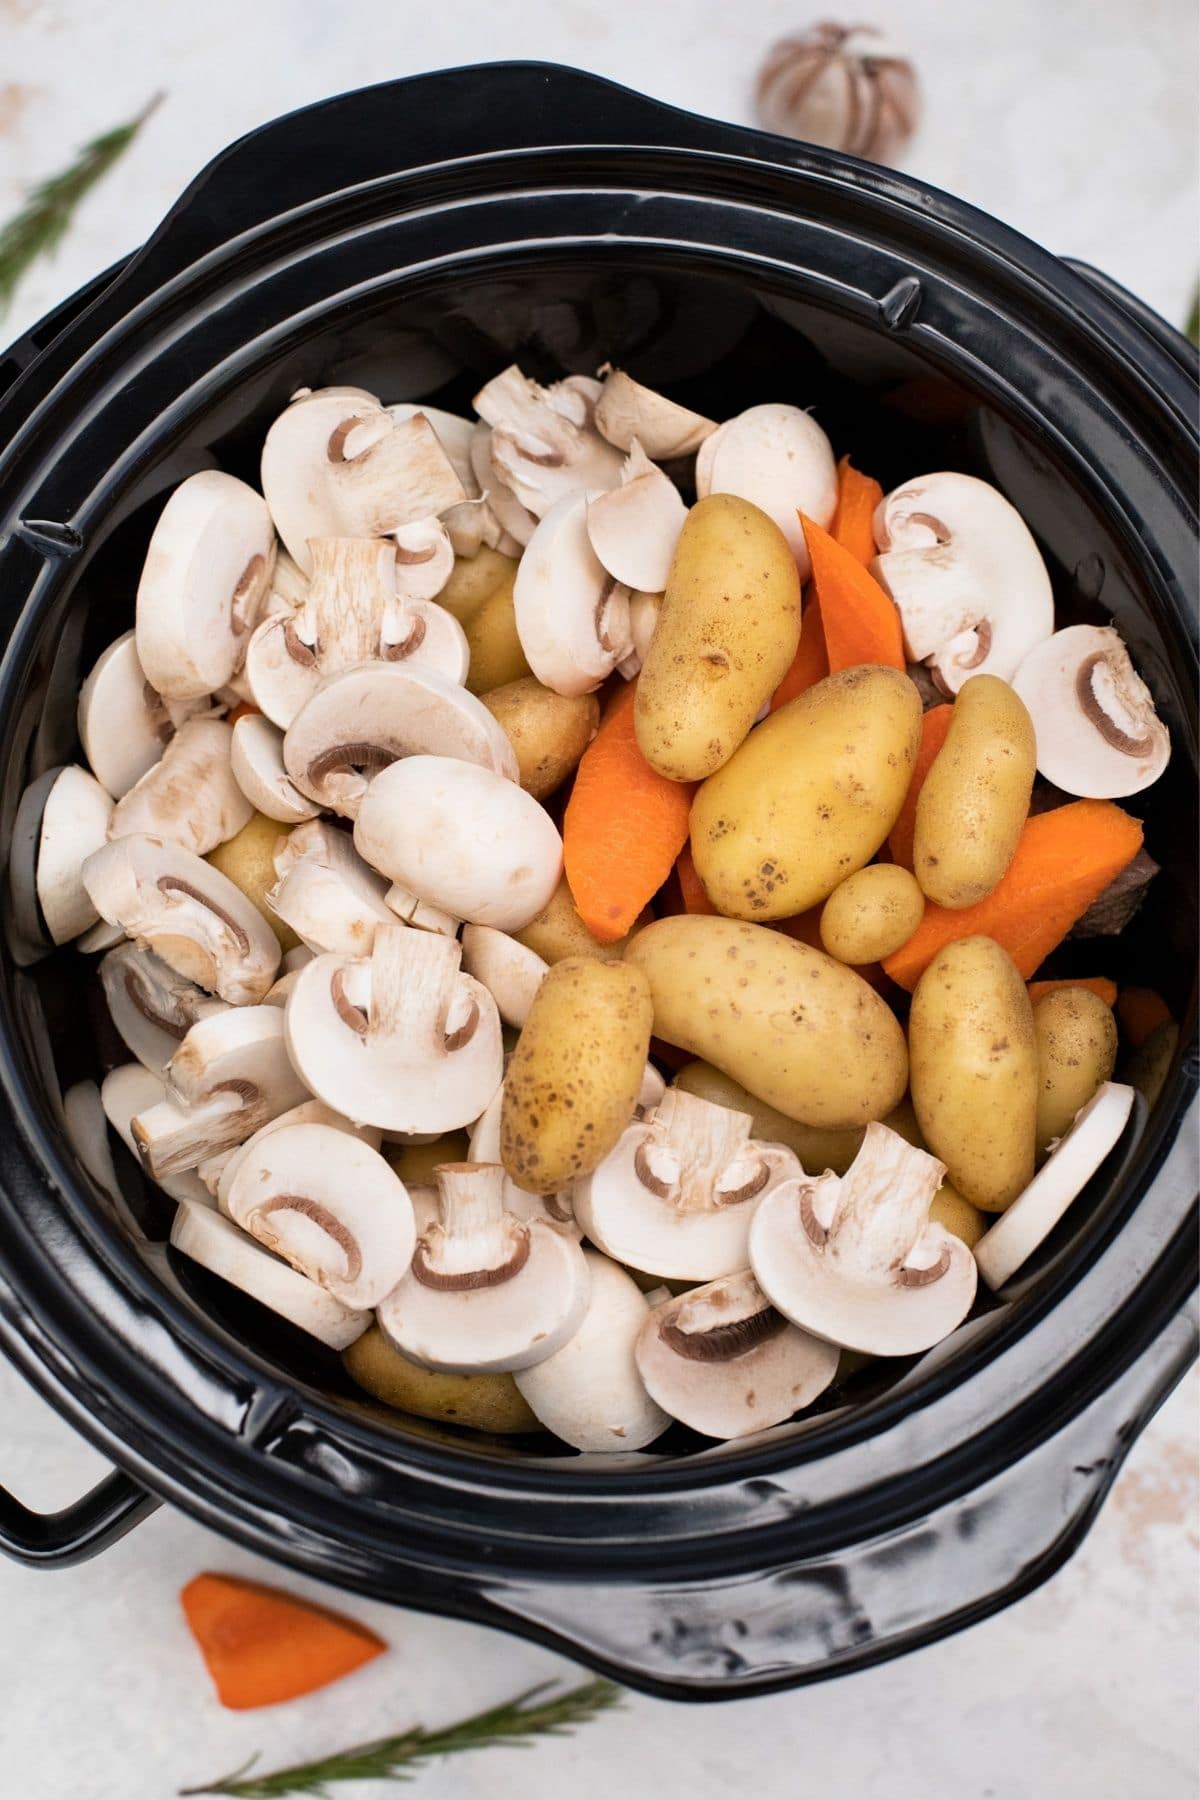 Round black crock filled with mushrooms potatoes and carrots